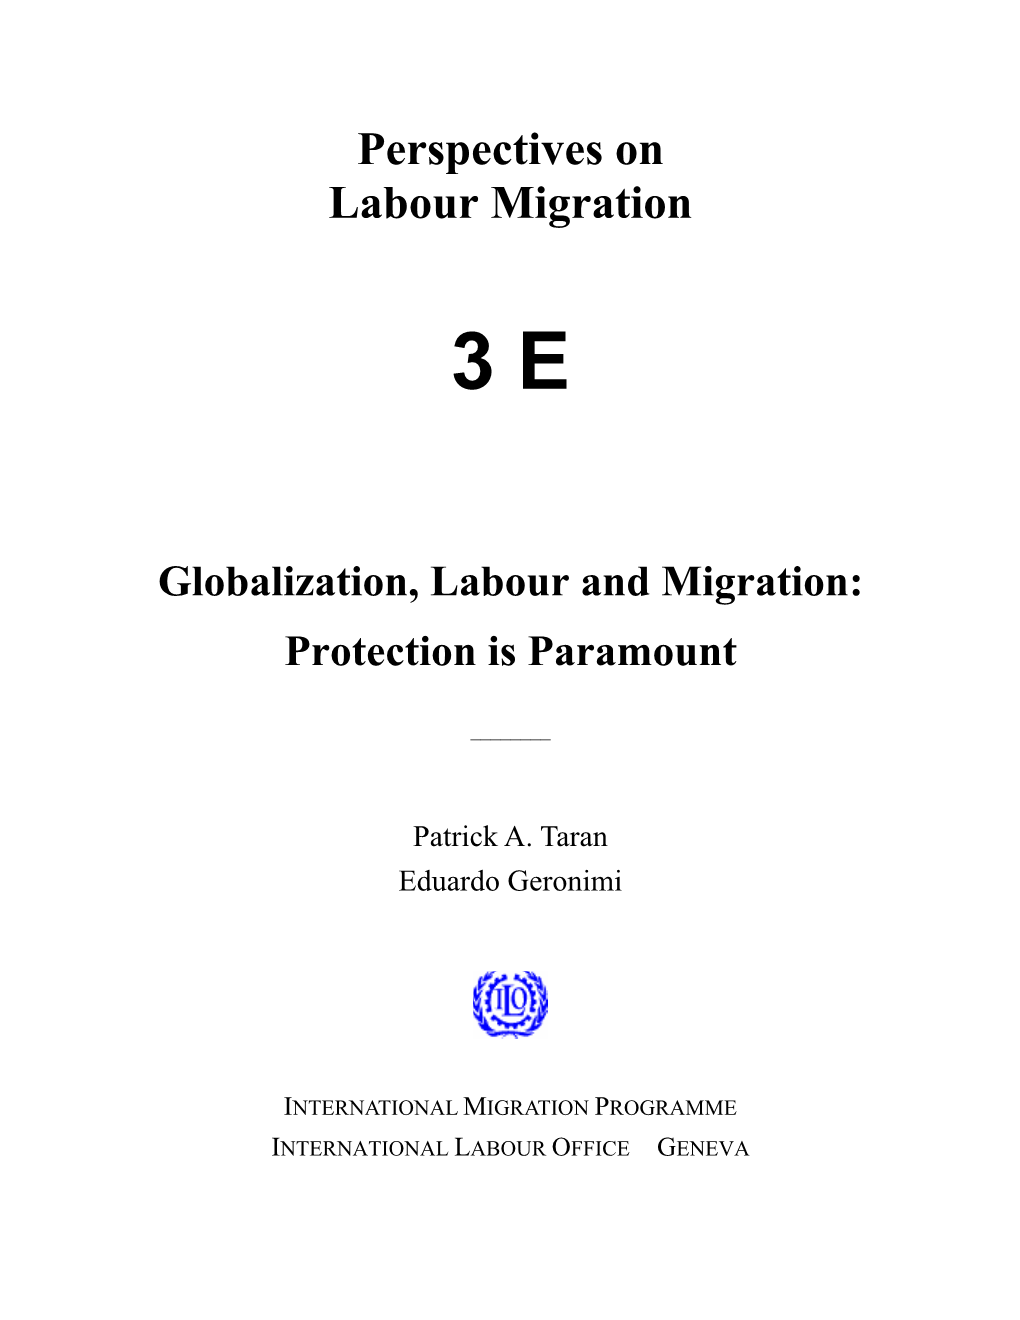 Globalization, Labour and Migration: Protection Is Paramount